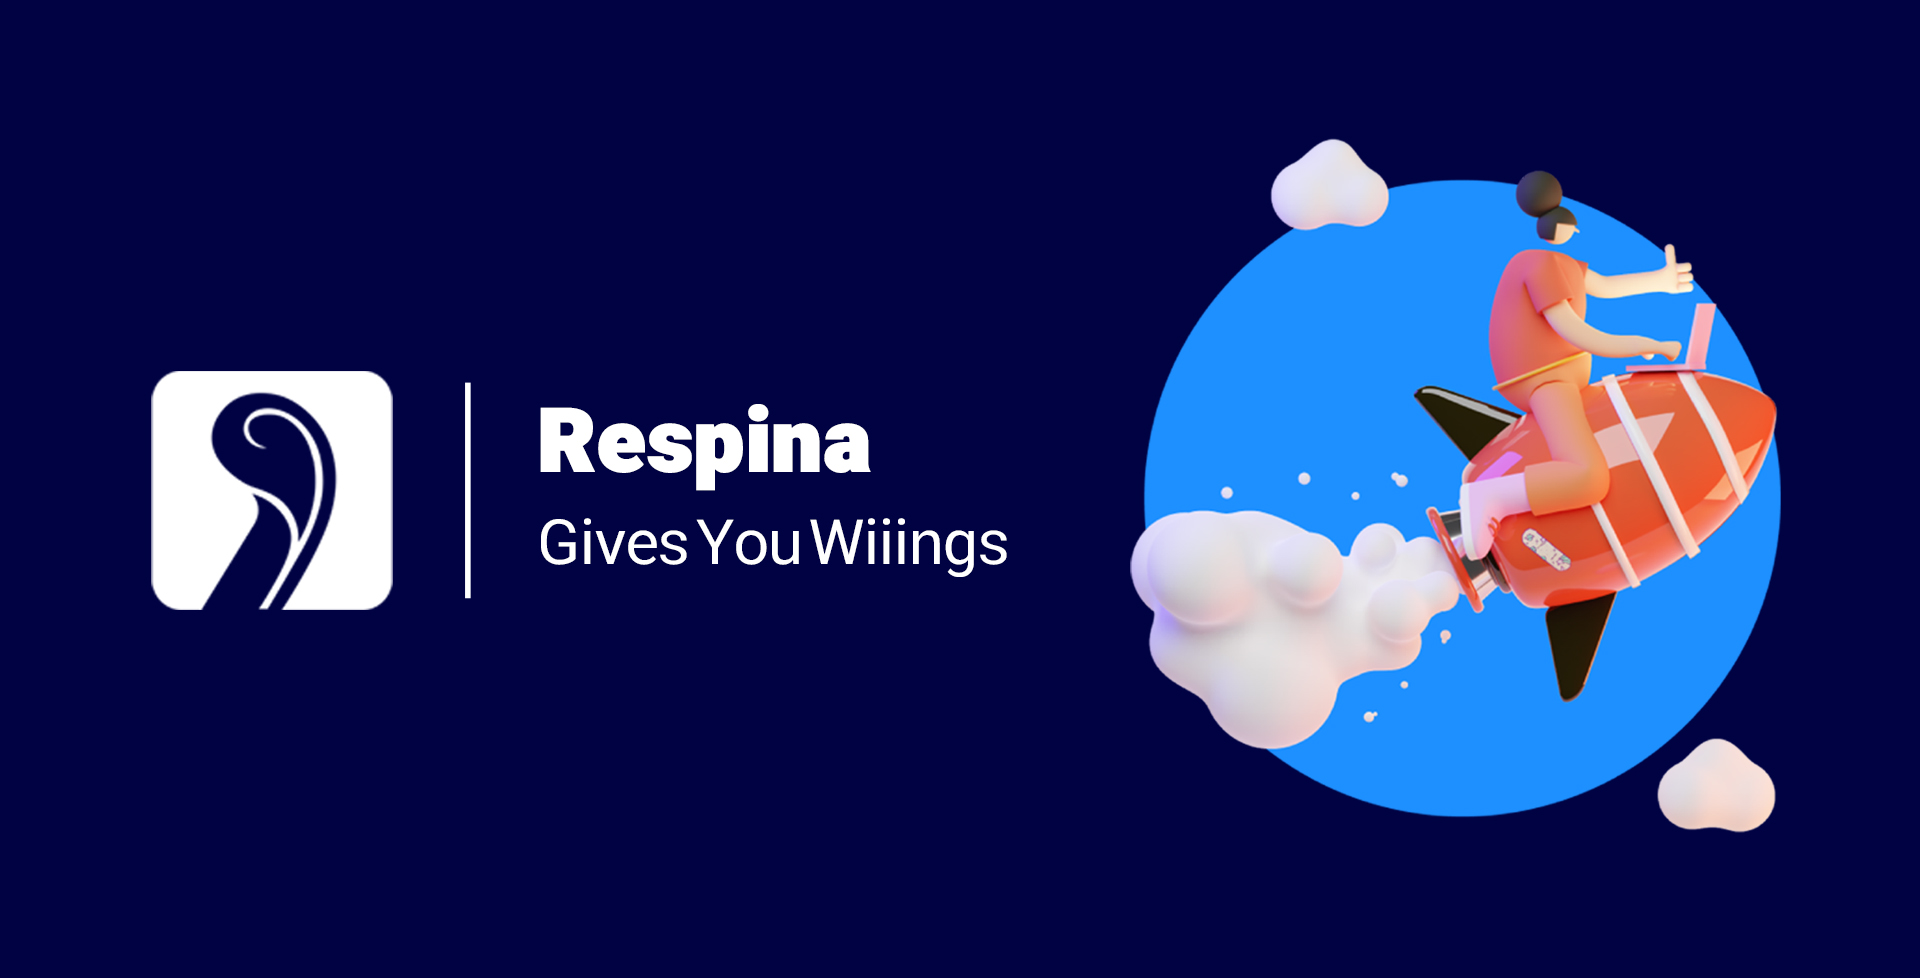 Respina gives you wings